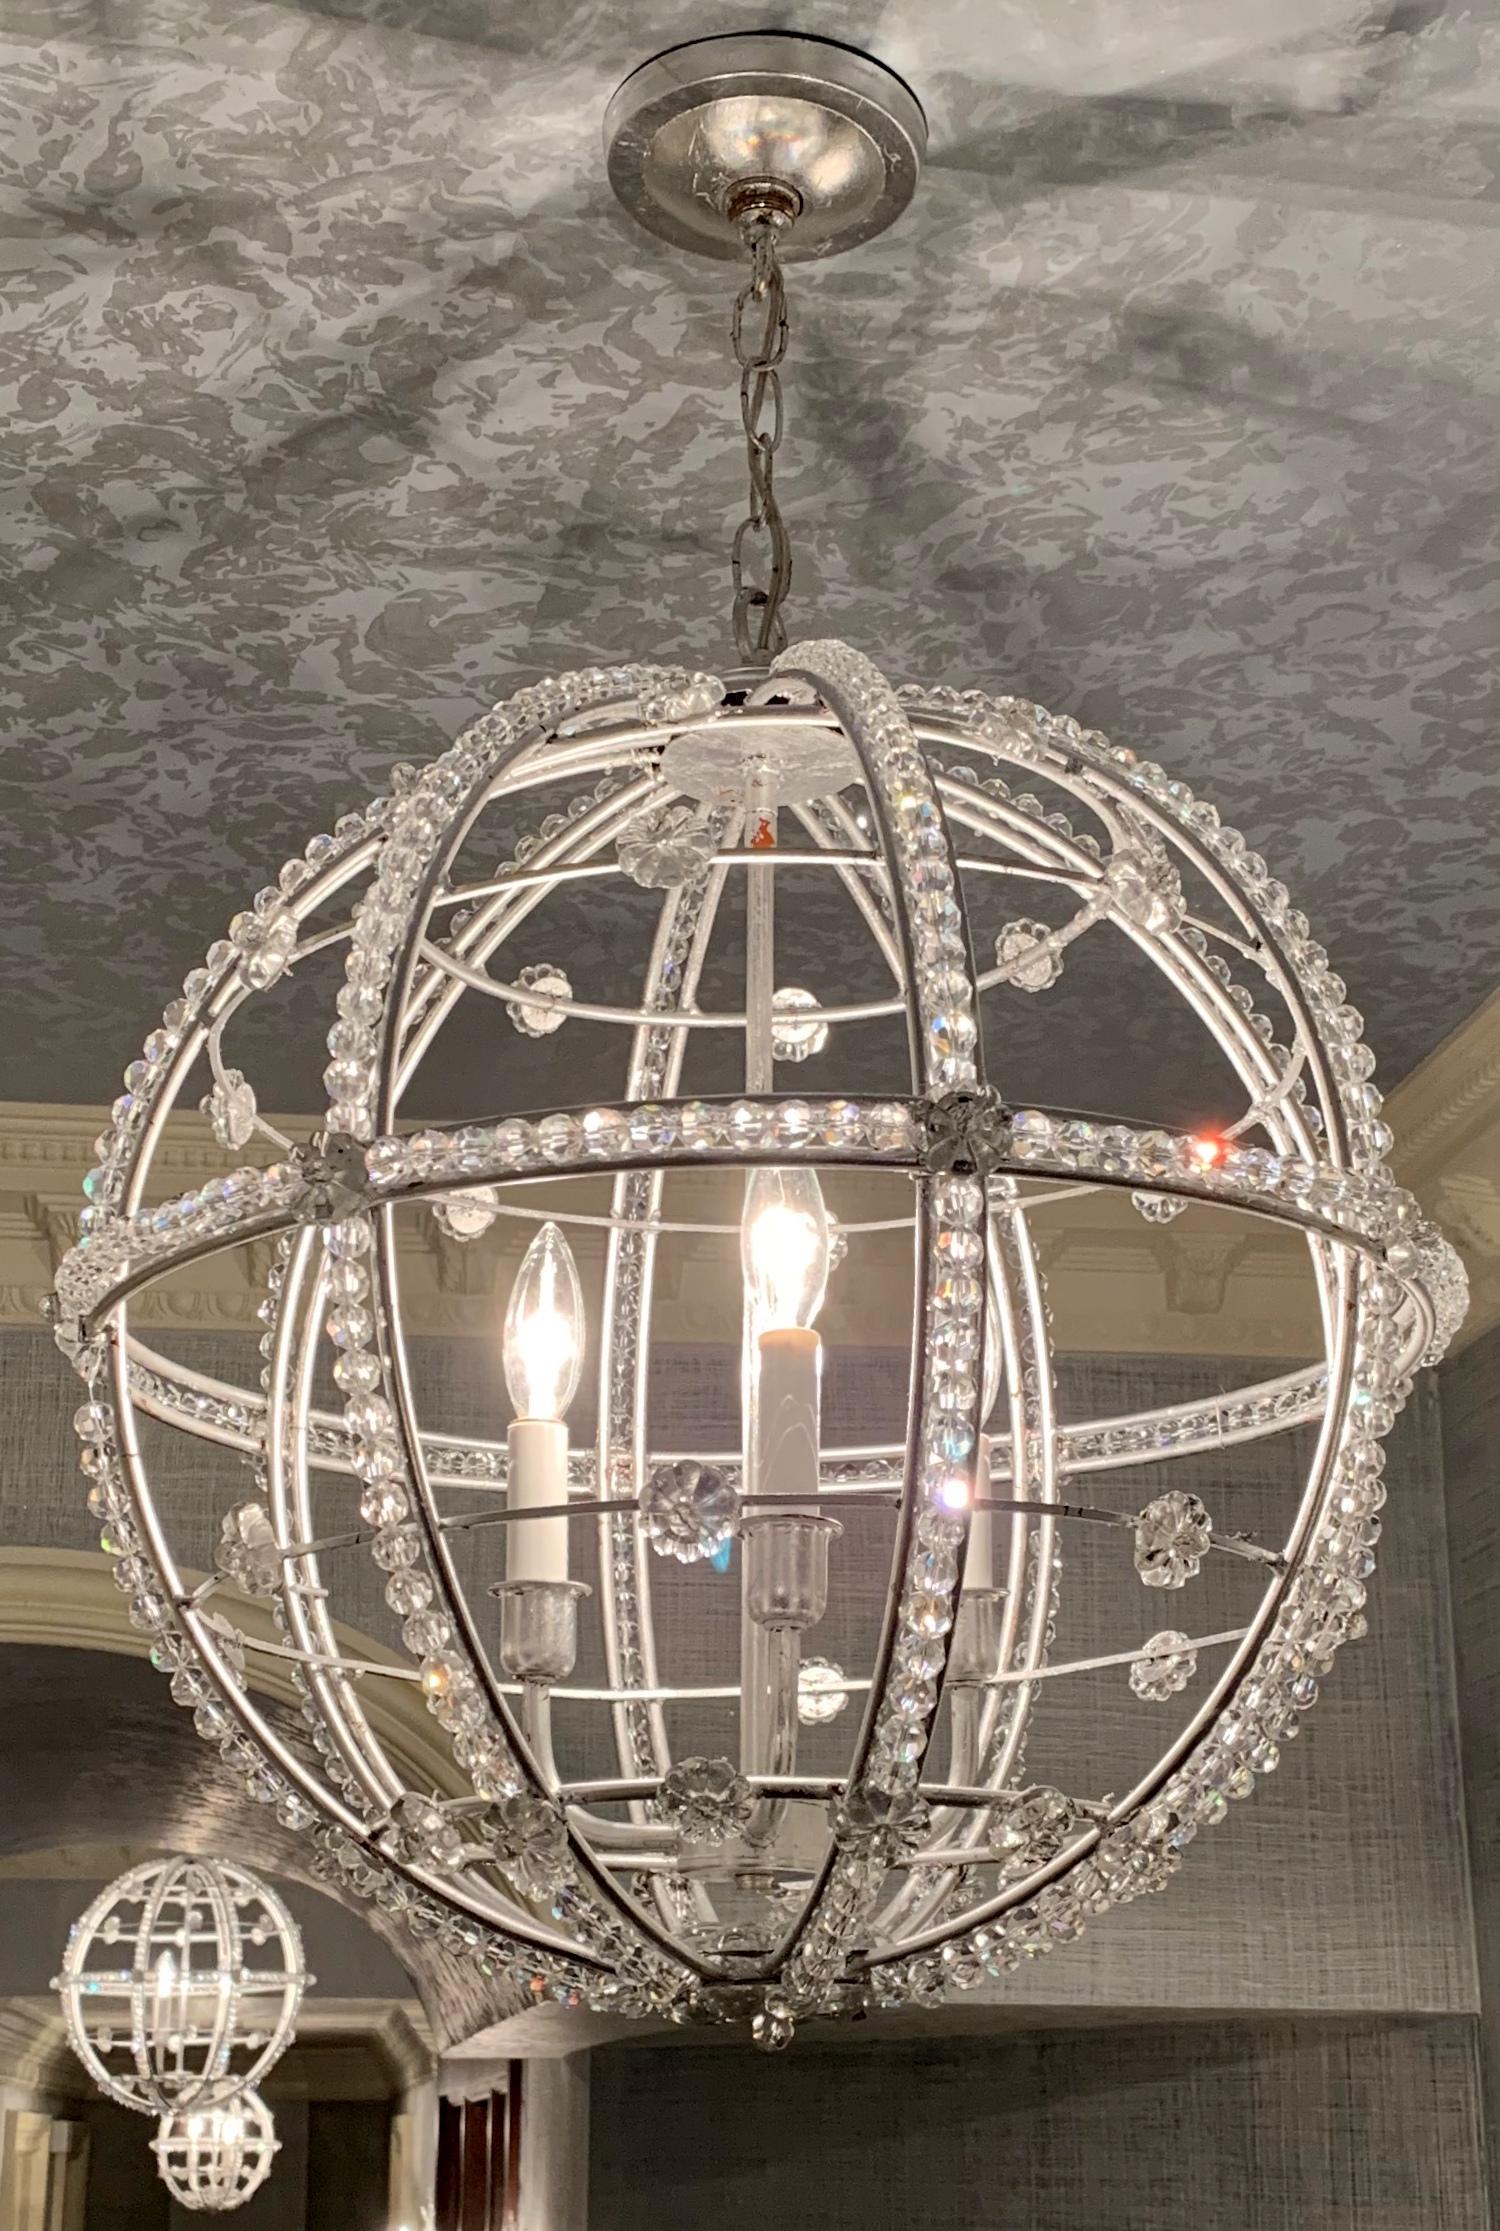 A wonderful Mid-Century Modern transitional silver leaf Sputnik ball chandelier light fixture
Perfect for any space, this silver leaf Sputnik style chandelier is detailed with crystal beads and accented with crystal flowers. 

Measures: 21